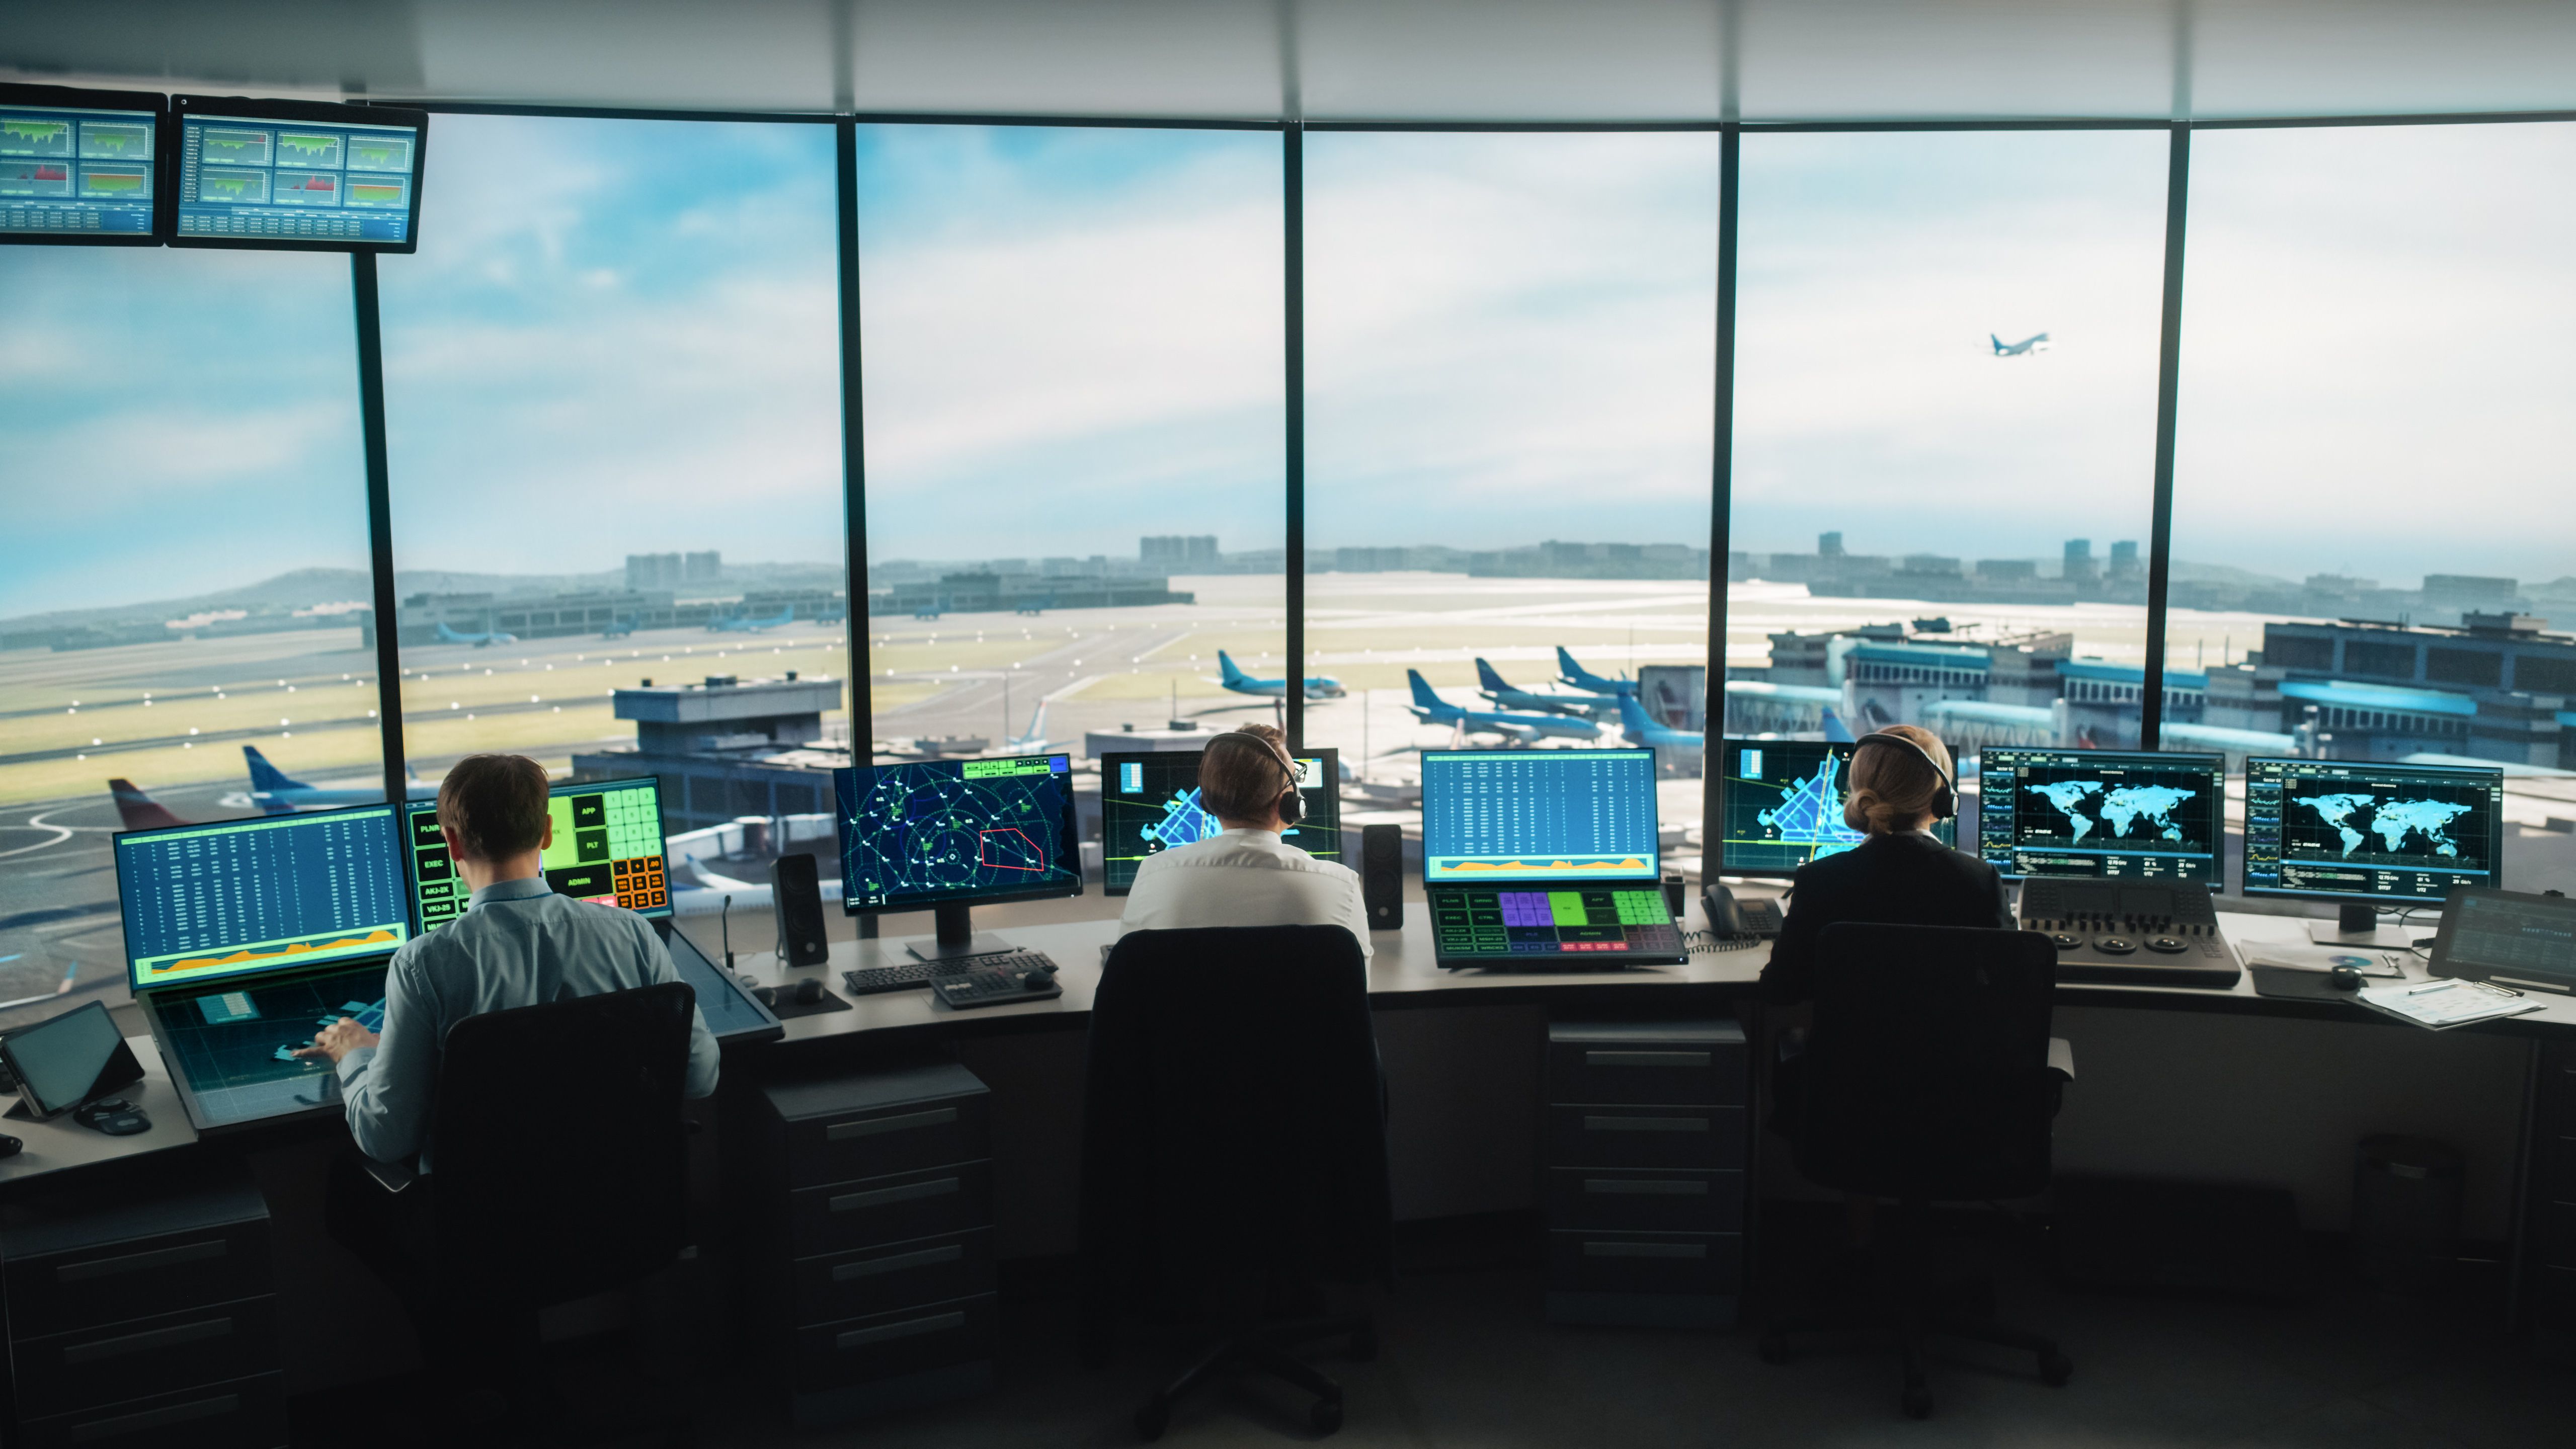 Several air traffic controllers at their workstations.